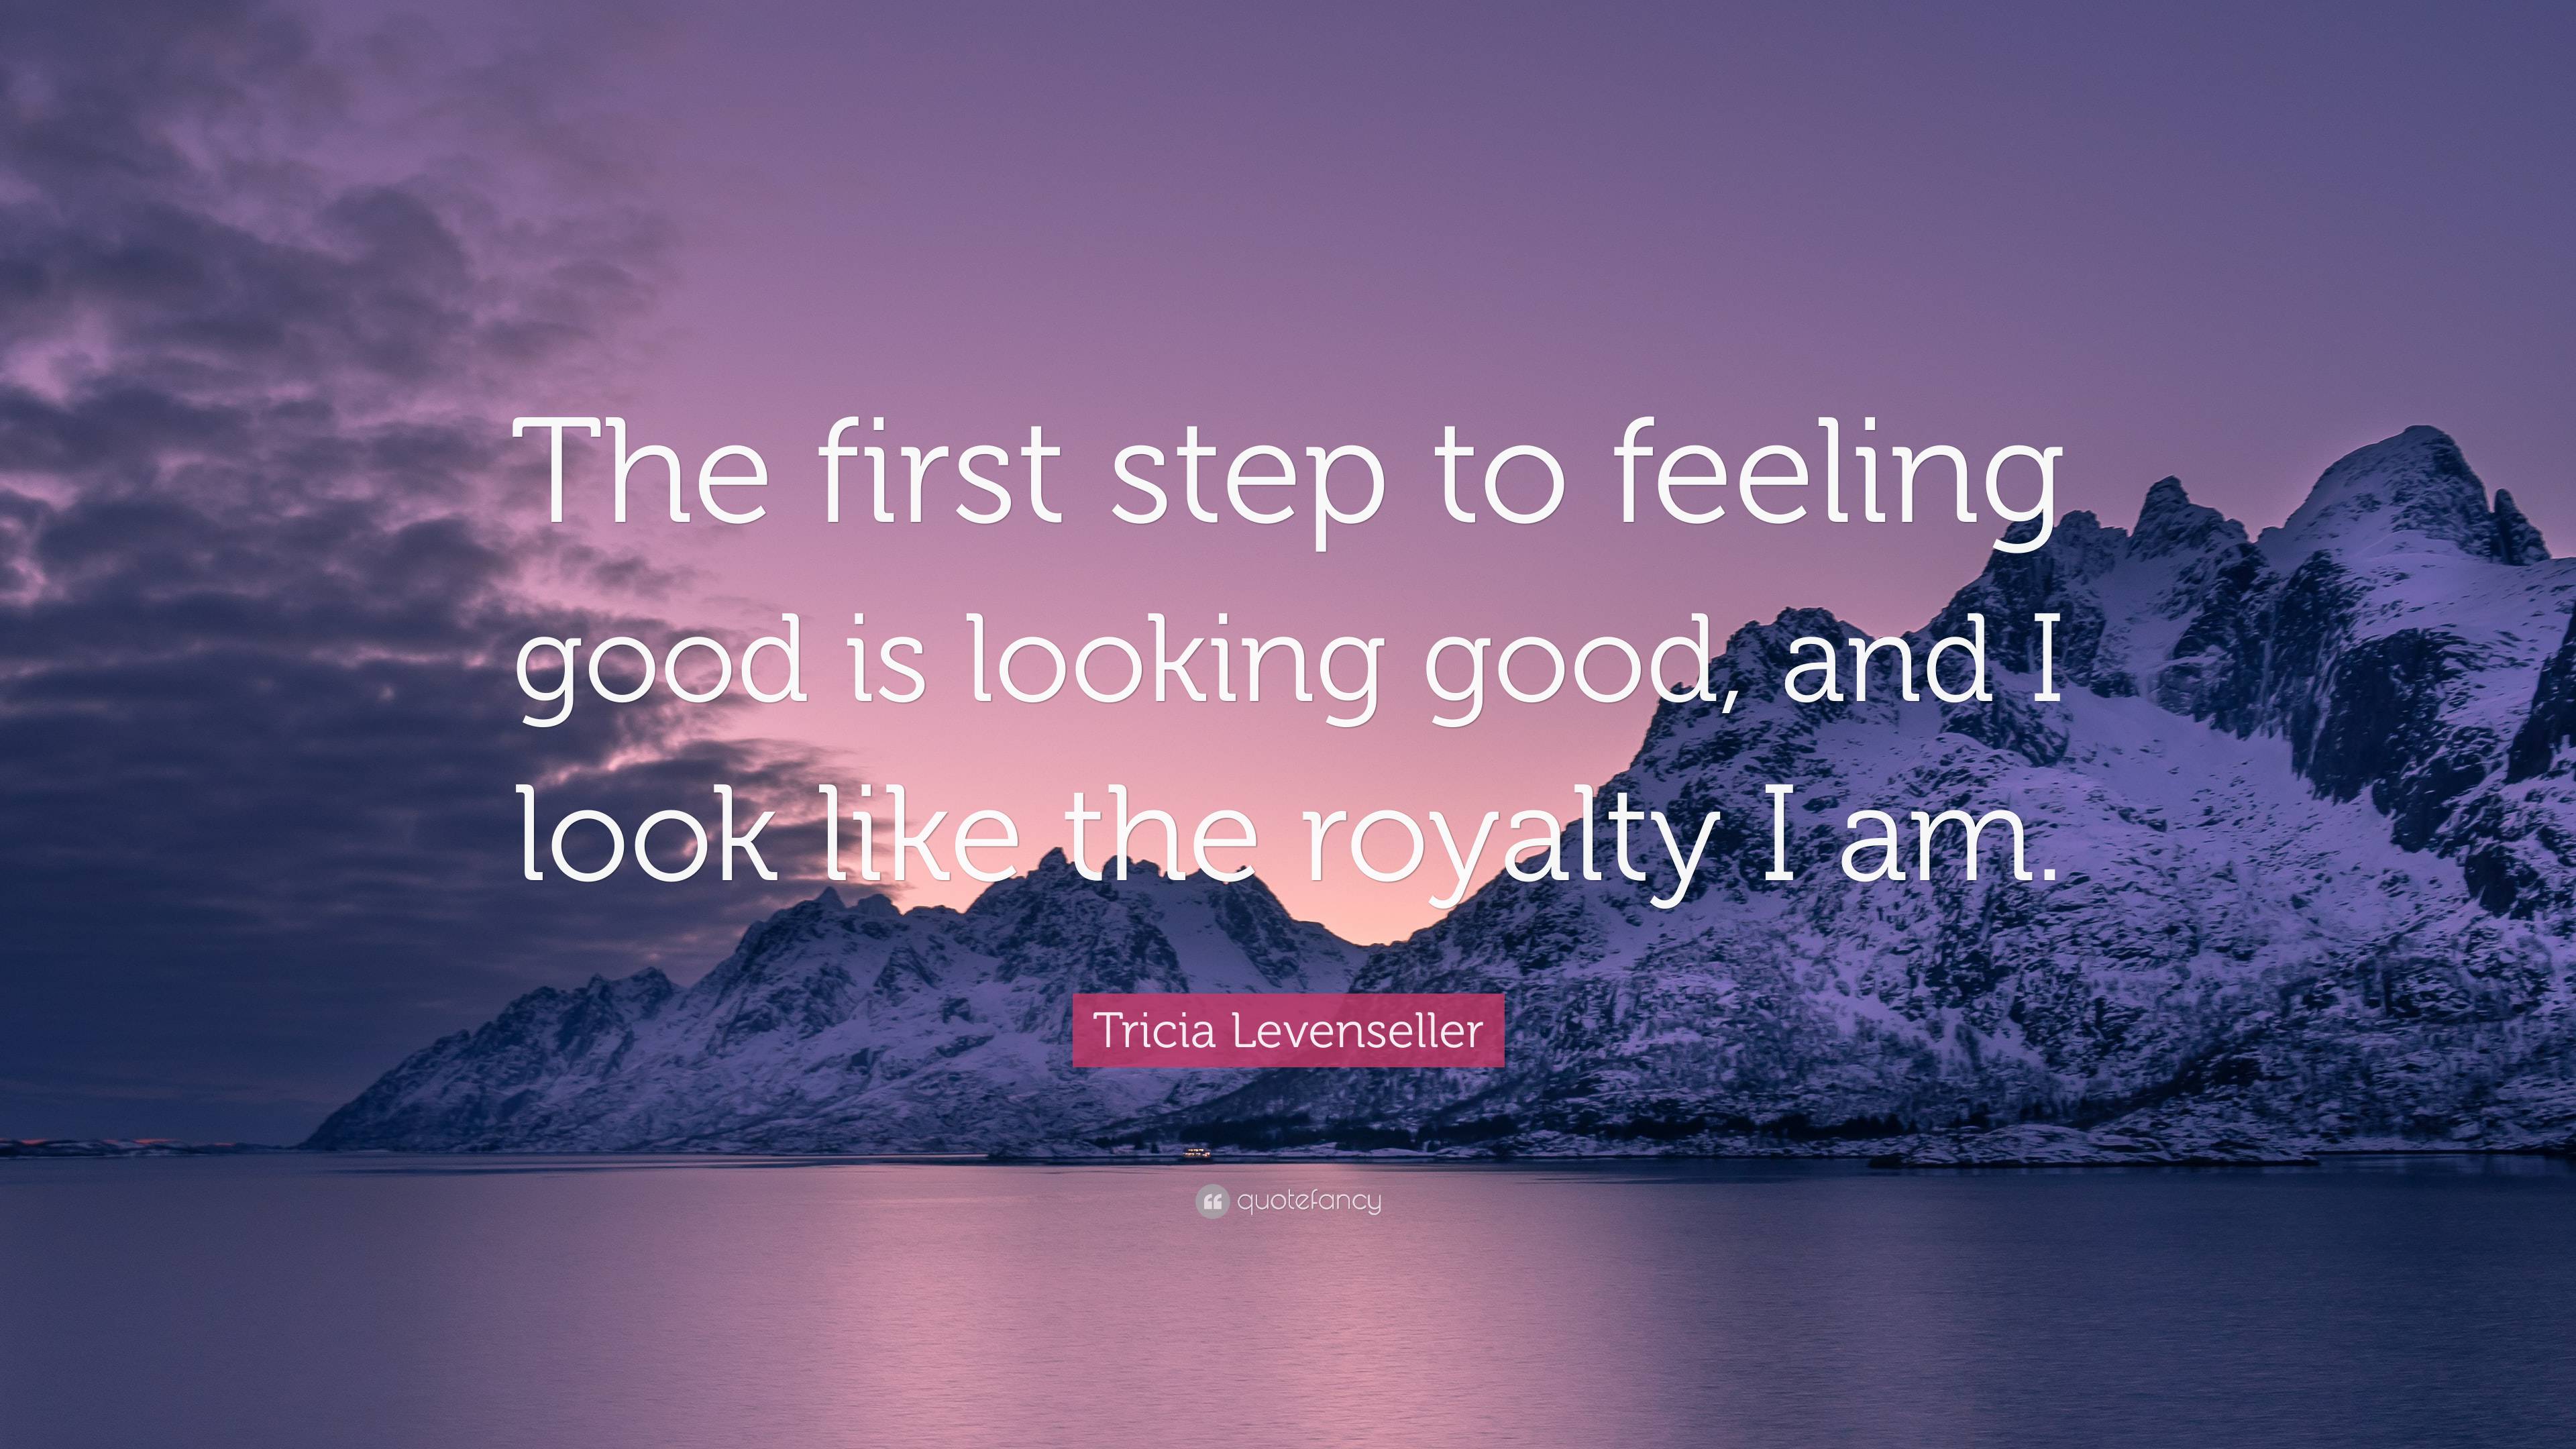 How to Master the Feel Good Look